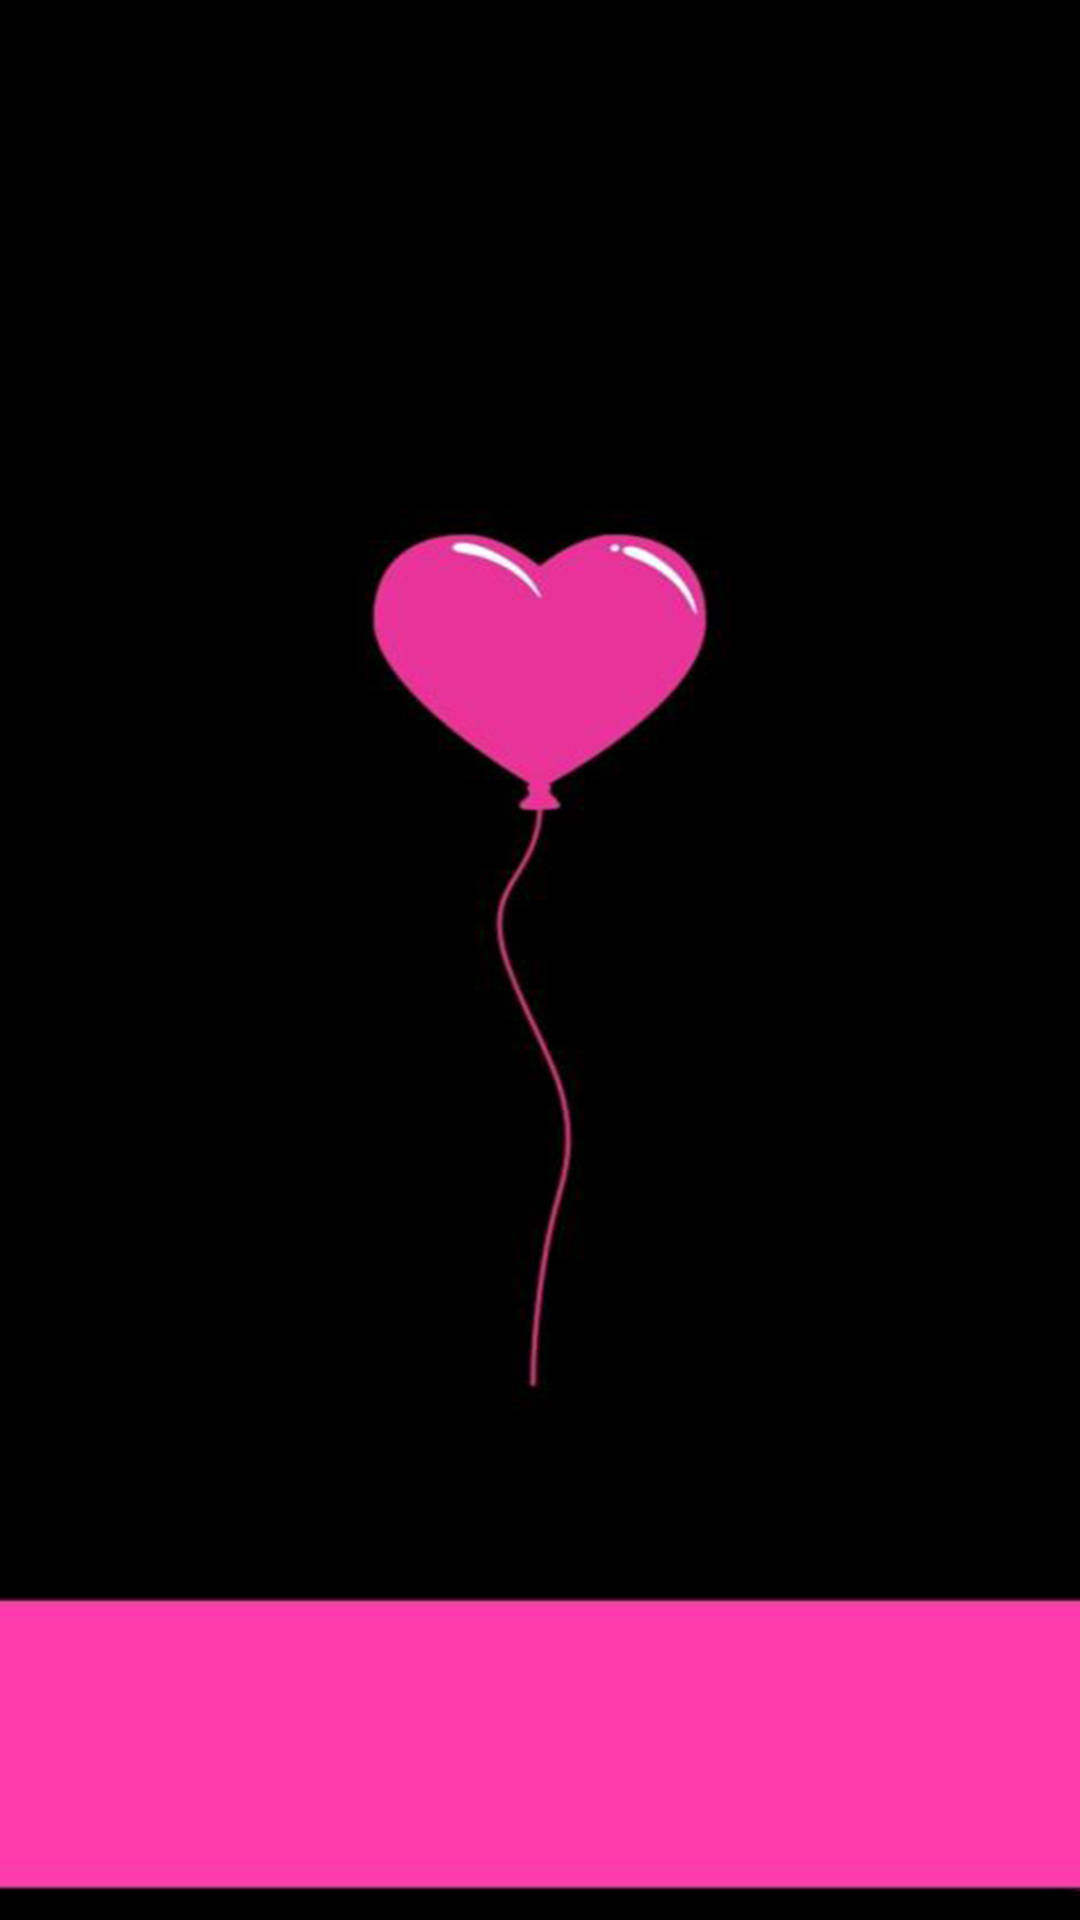 Black And Pink Aesthetic Heart Balloon